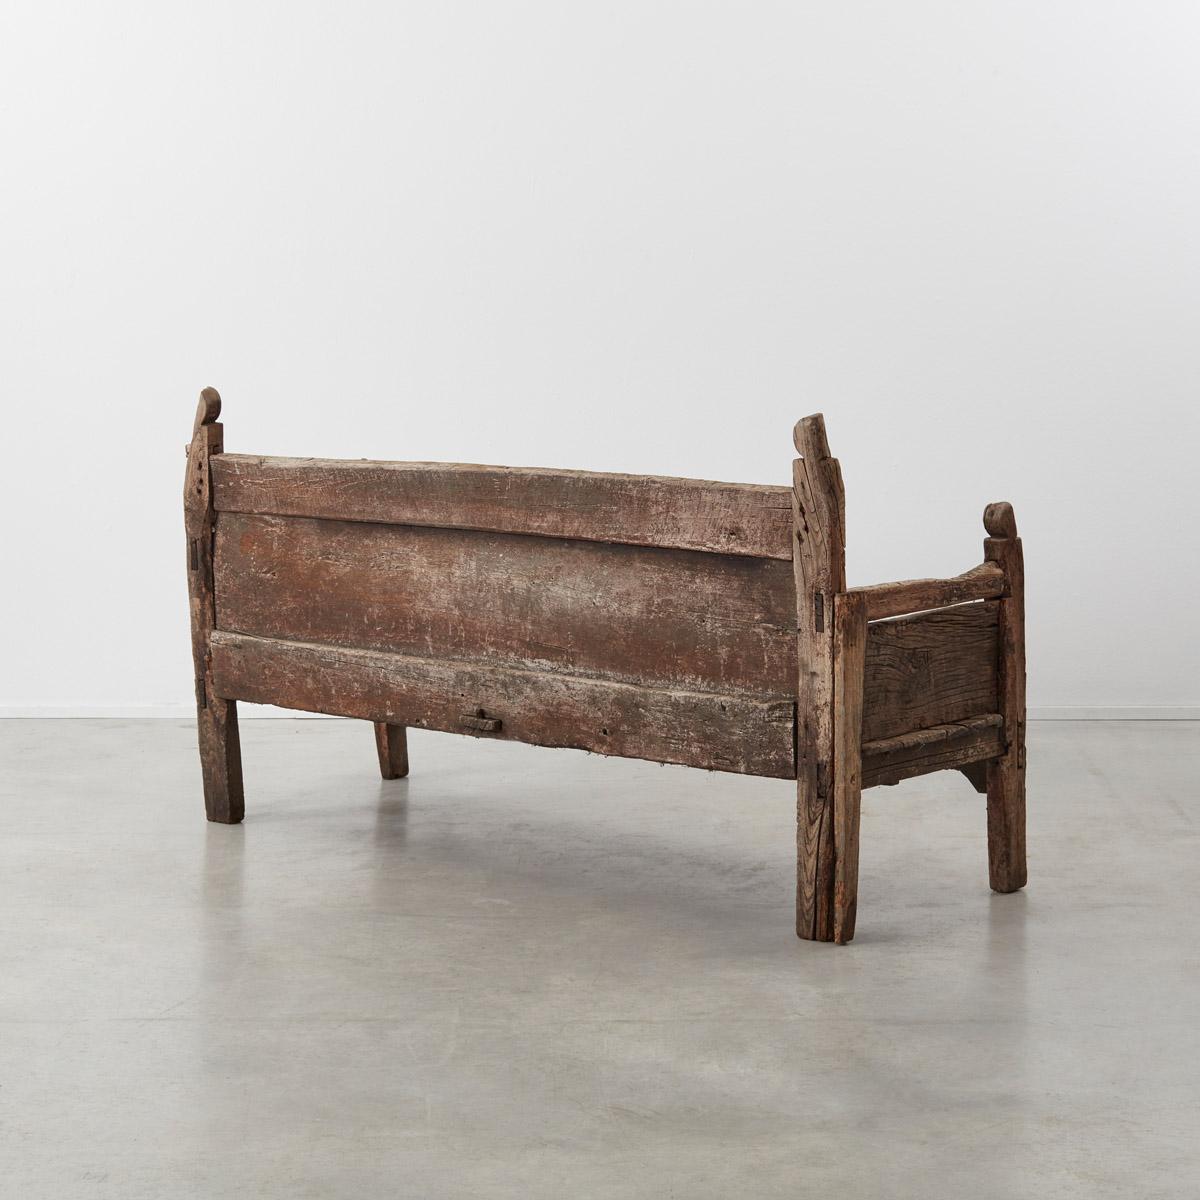 Wood 18th Century Weathered Galician Bench, Spain